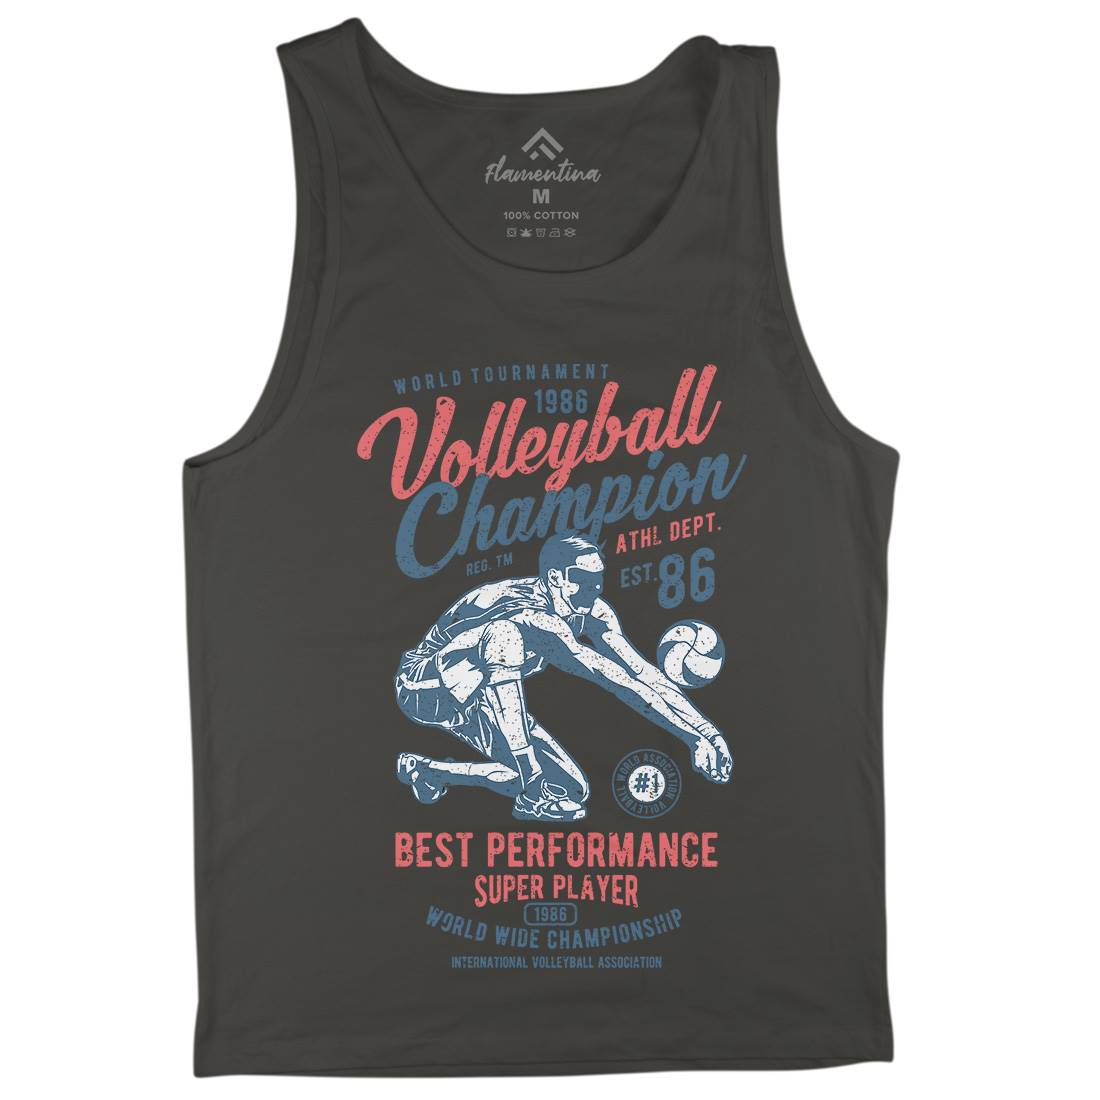 Volleyball Champion Mens Tank Top Vest Sport A789